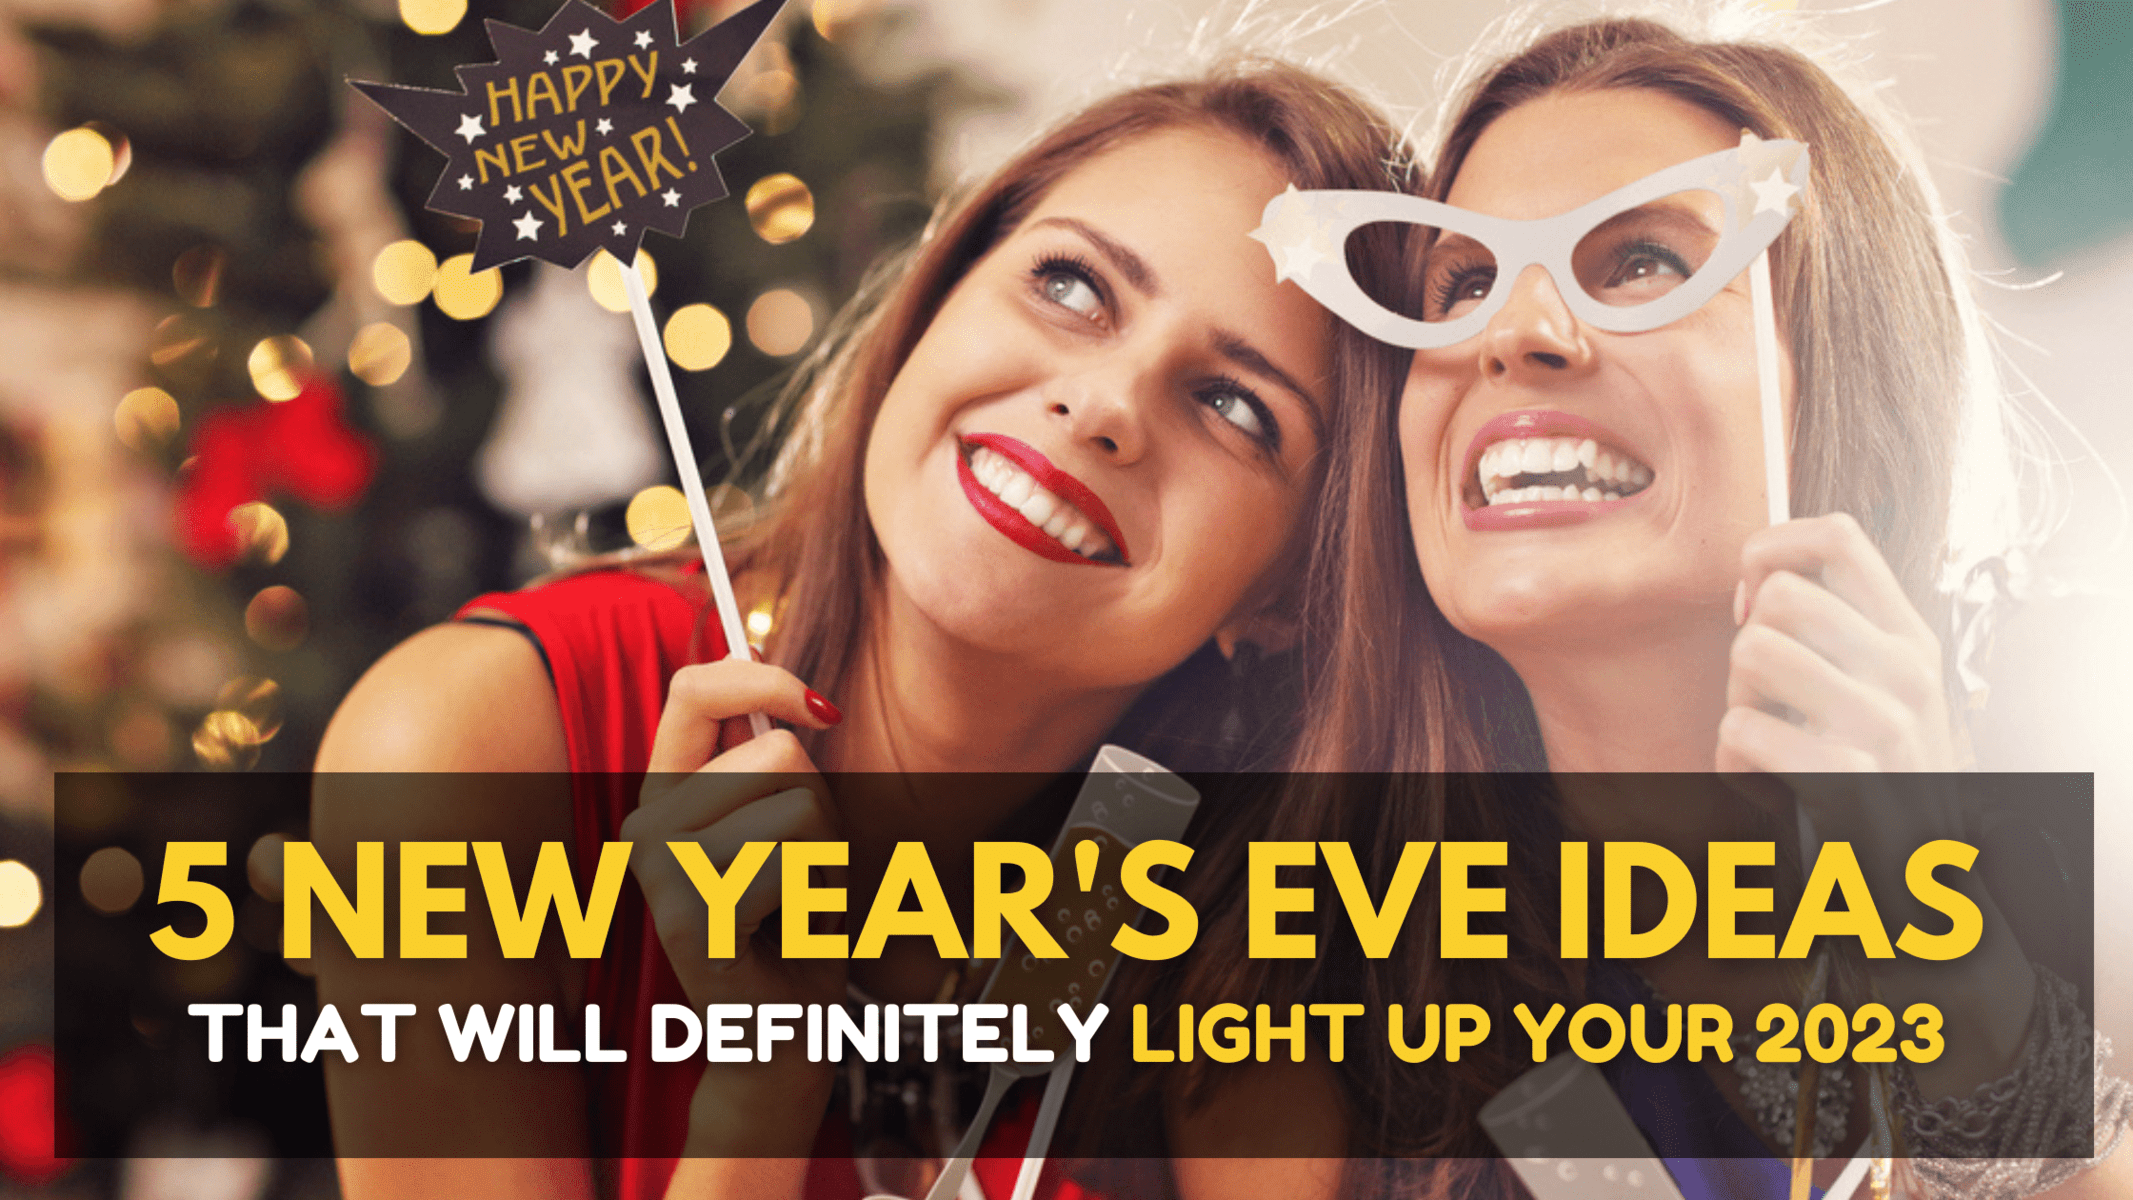 #CheersToTheNewYear: 5  New Year’s Eve Ideas That Will Definitely Light Up Your 2023